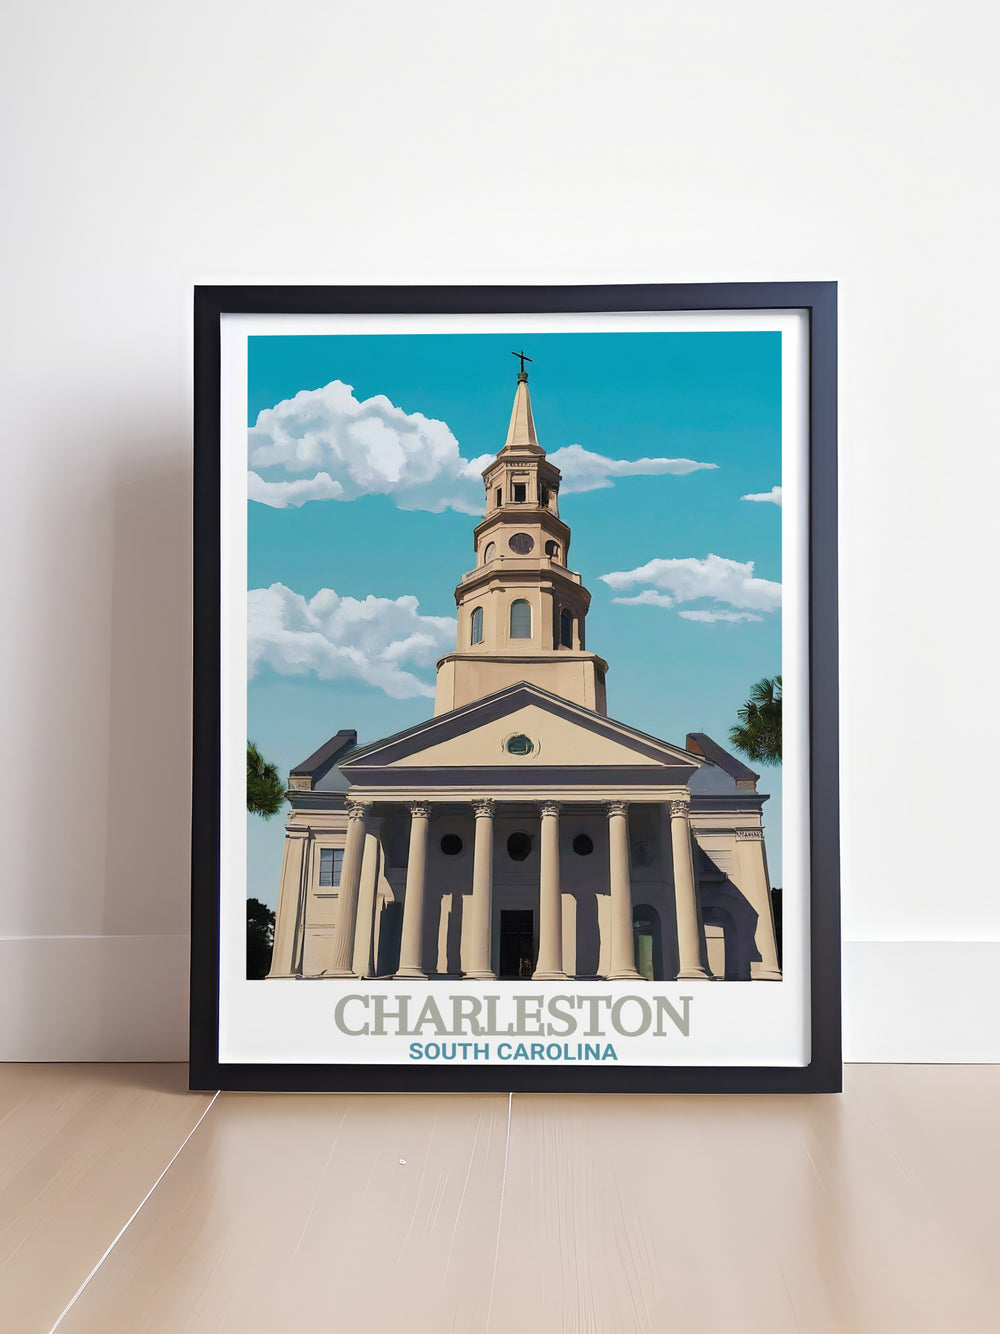 Beautiful St. Michaels Church prints highlighting the intricate details and elegant design of Charleston ideal for wall art and home decor bringing the historic charm of St. Michaels Church into your living space